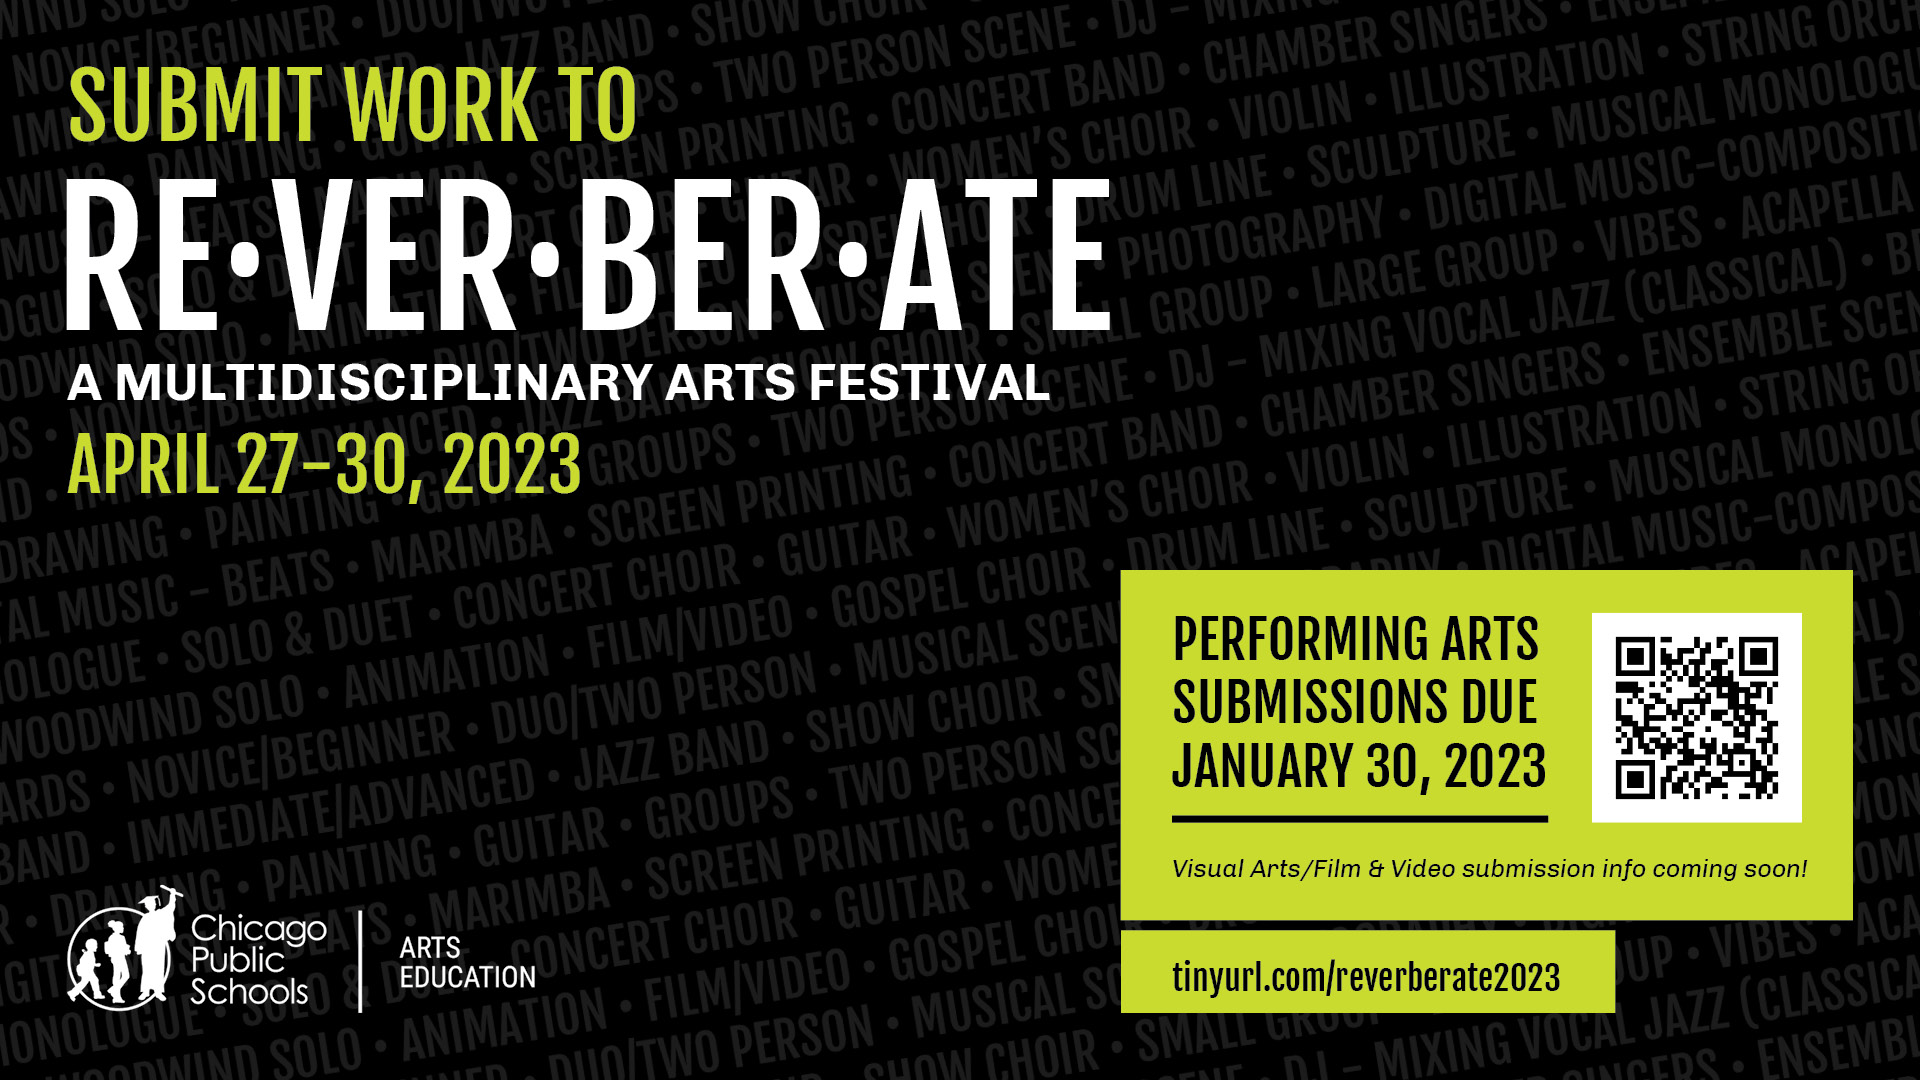 Submit work to Re*Ver*Ber*Ate, A multidisciplinary arts festival, April 27-30, 2023. Submissions due January 30, 2023.